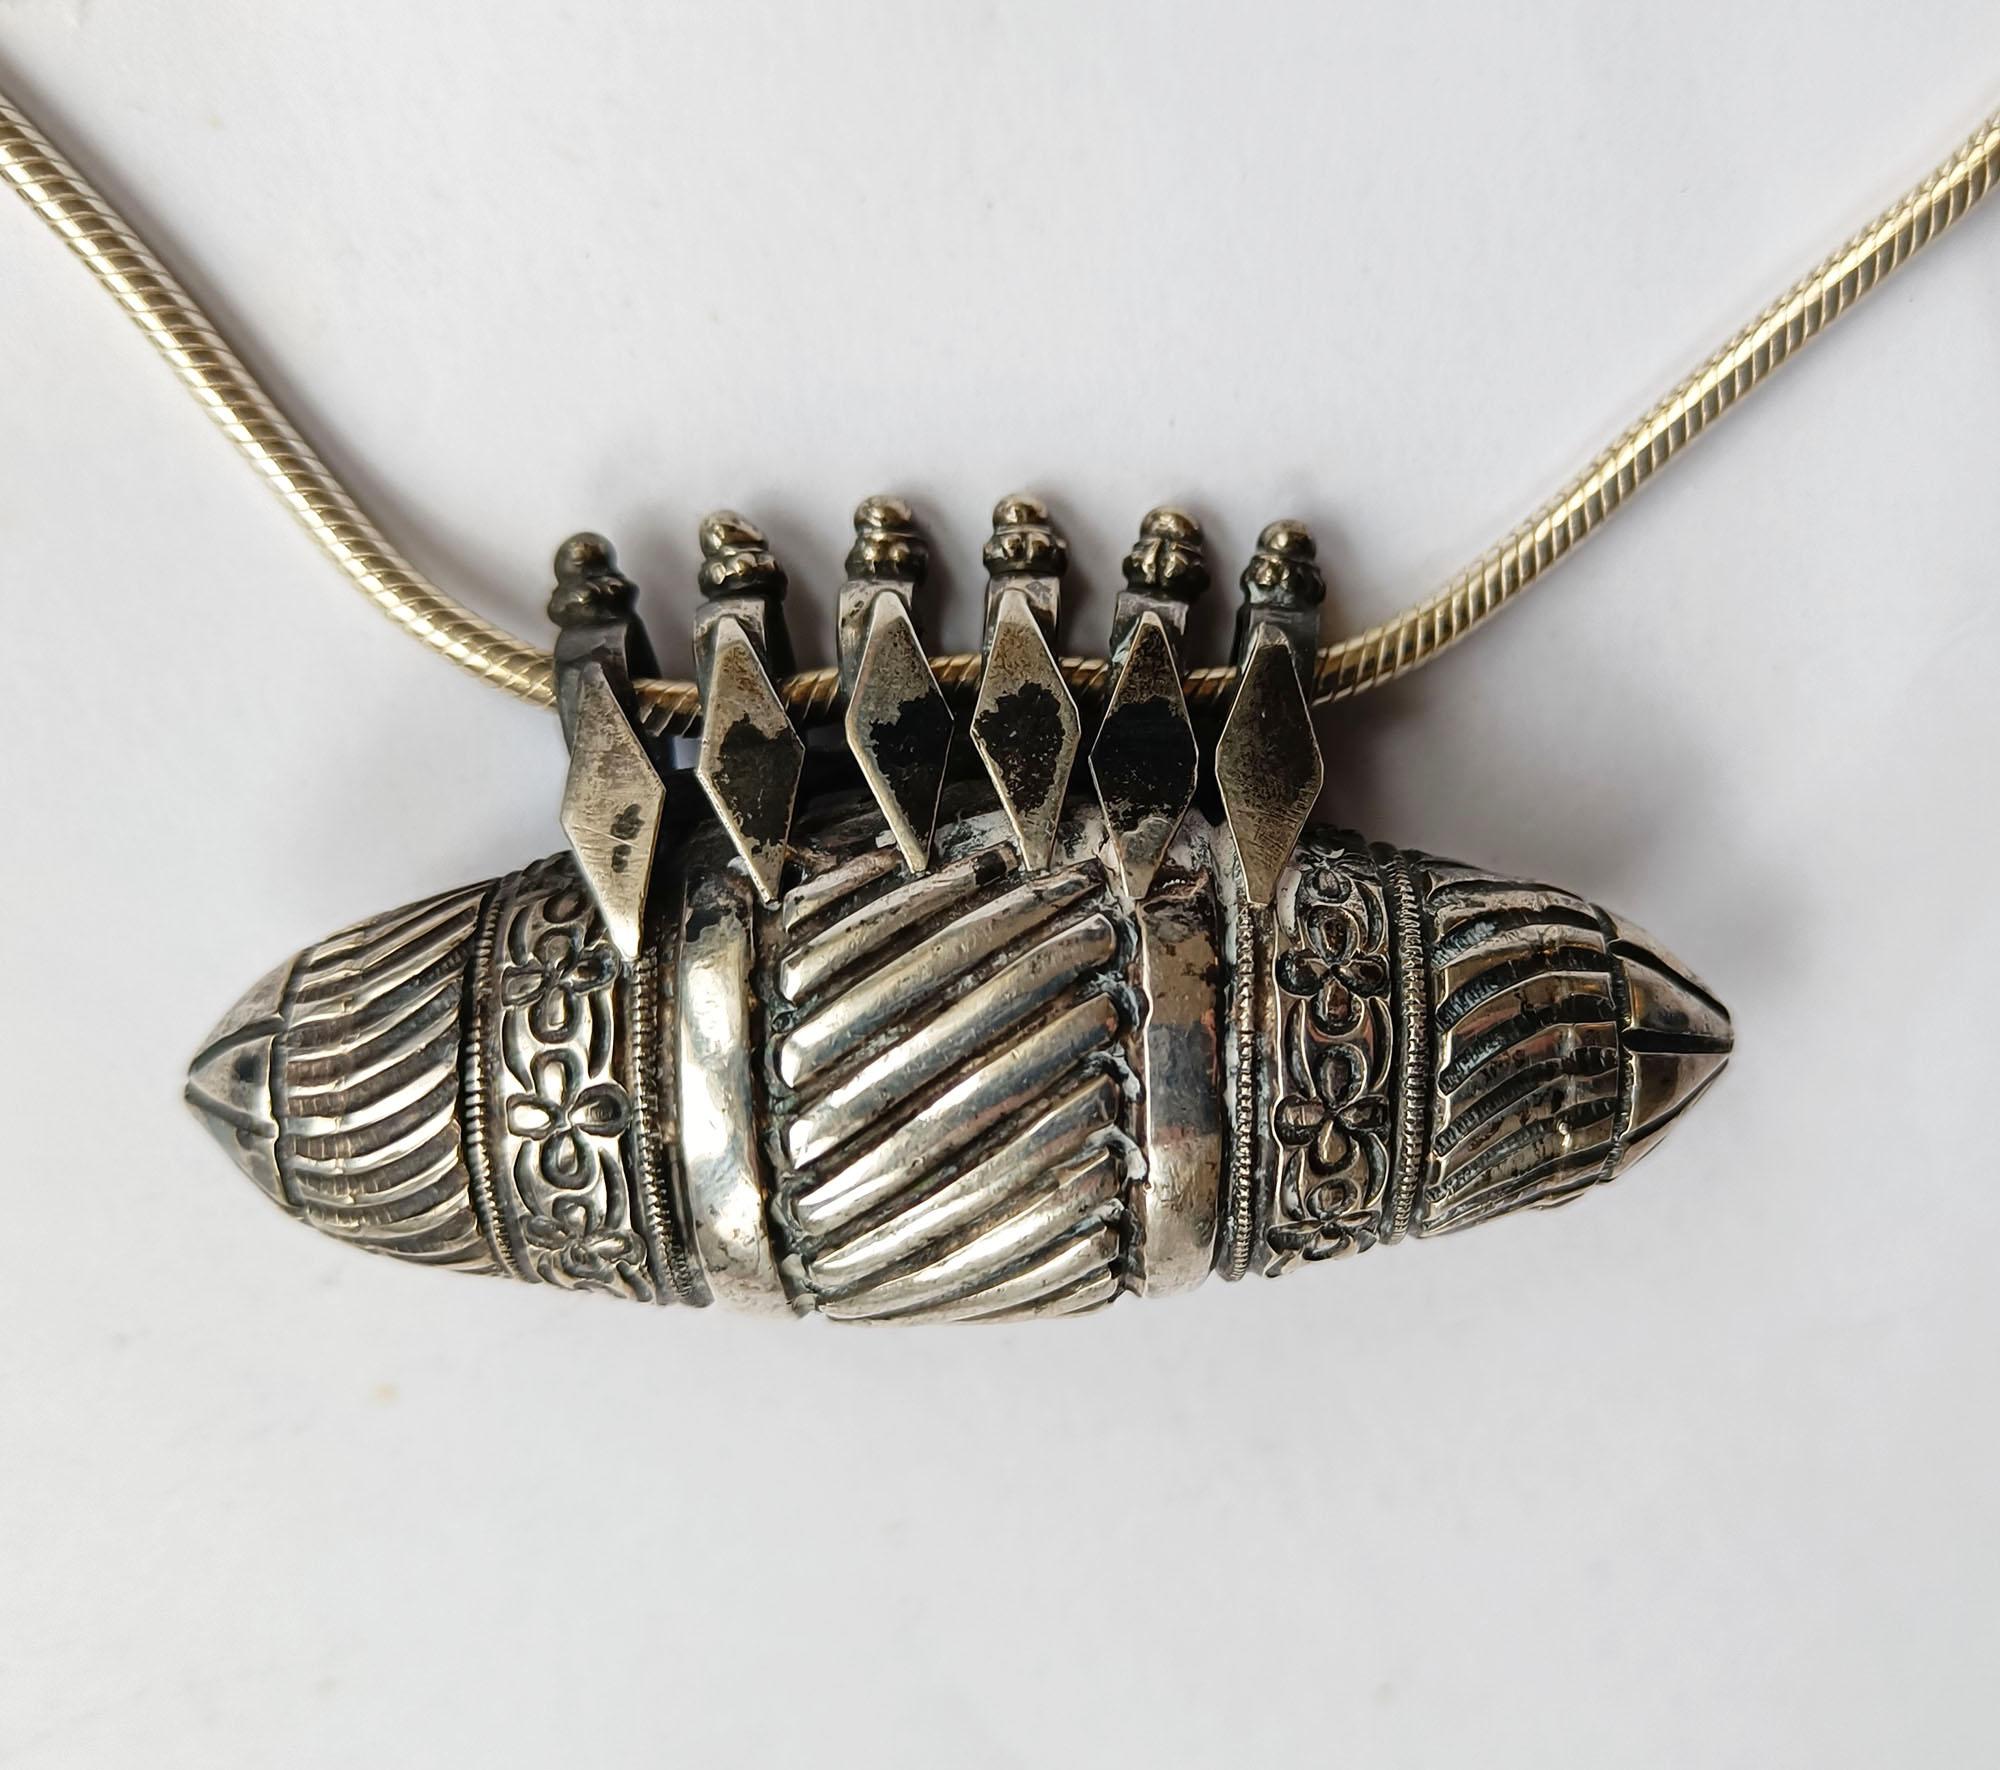 South Indian Hindu Silver Amulet necklace 
Heavy bullet shaped Amulet  necklace with pointed ends with floral and geometric design
High grade silver  
Pendant Length 9 cm  weight 90 grams pure silver
Period mid 20th century
Condition: Fine.
 
